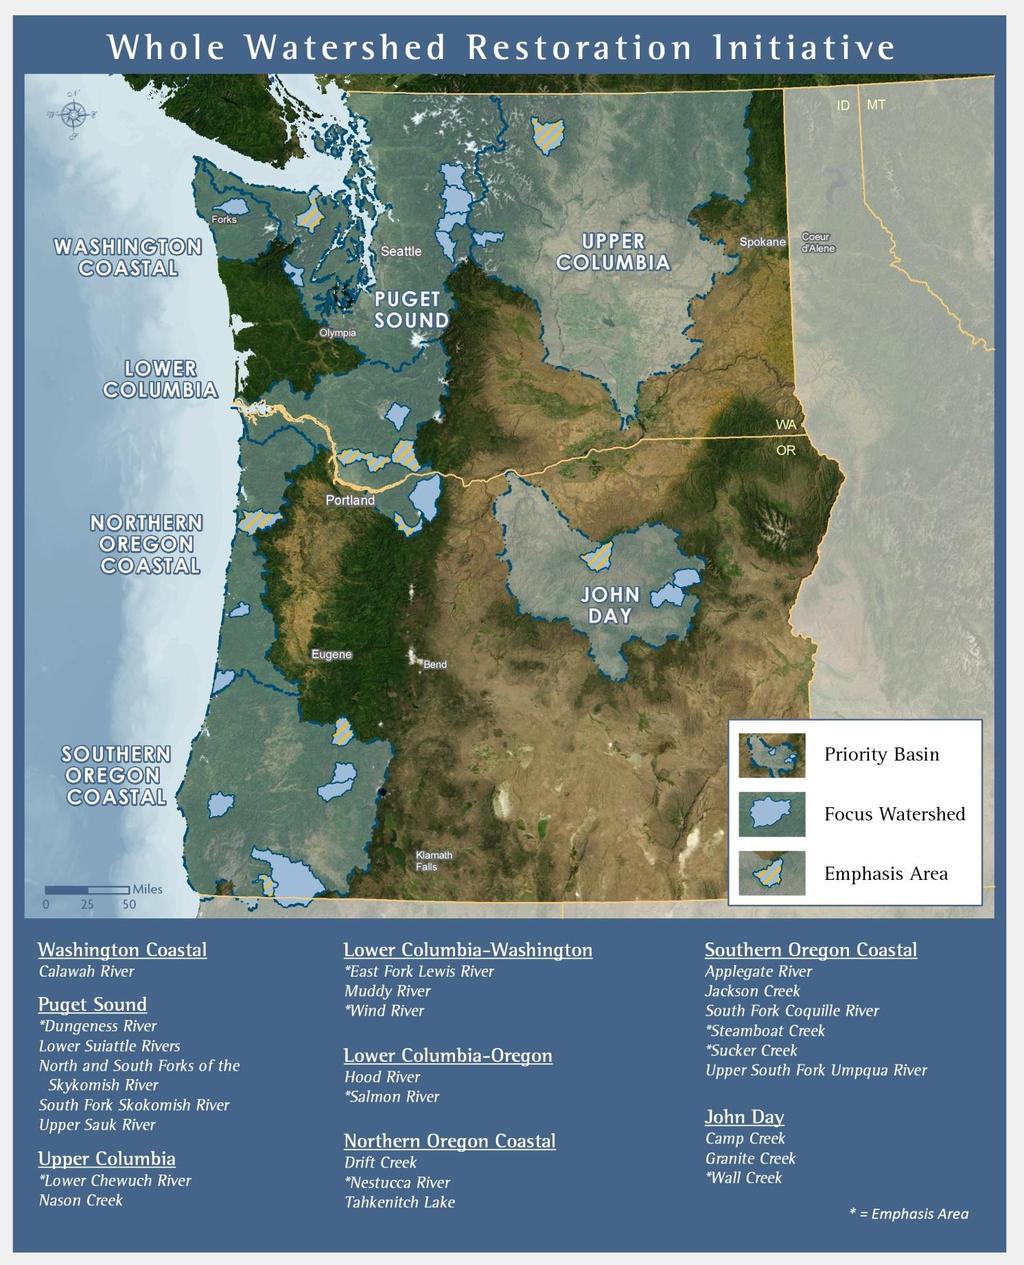 Map of Priority Basins, Focus Watersheds and Emphasis Areas 4